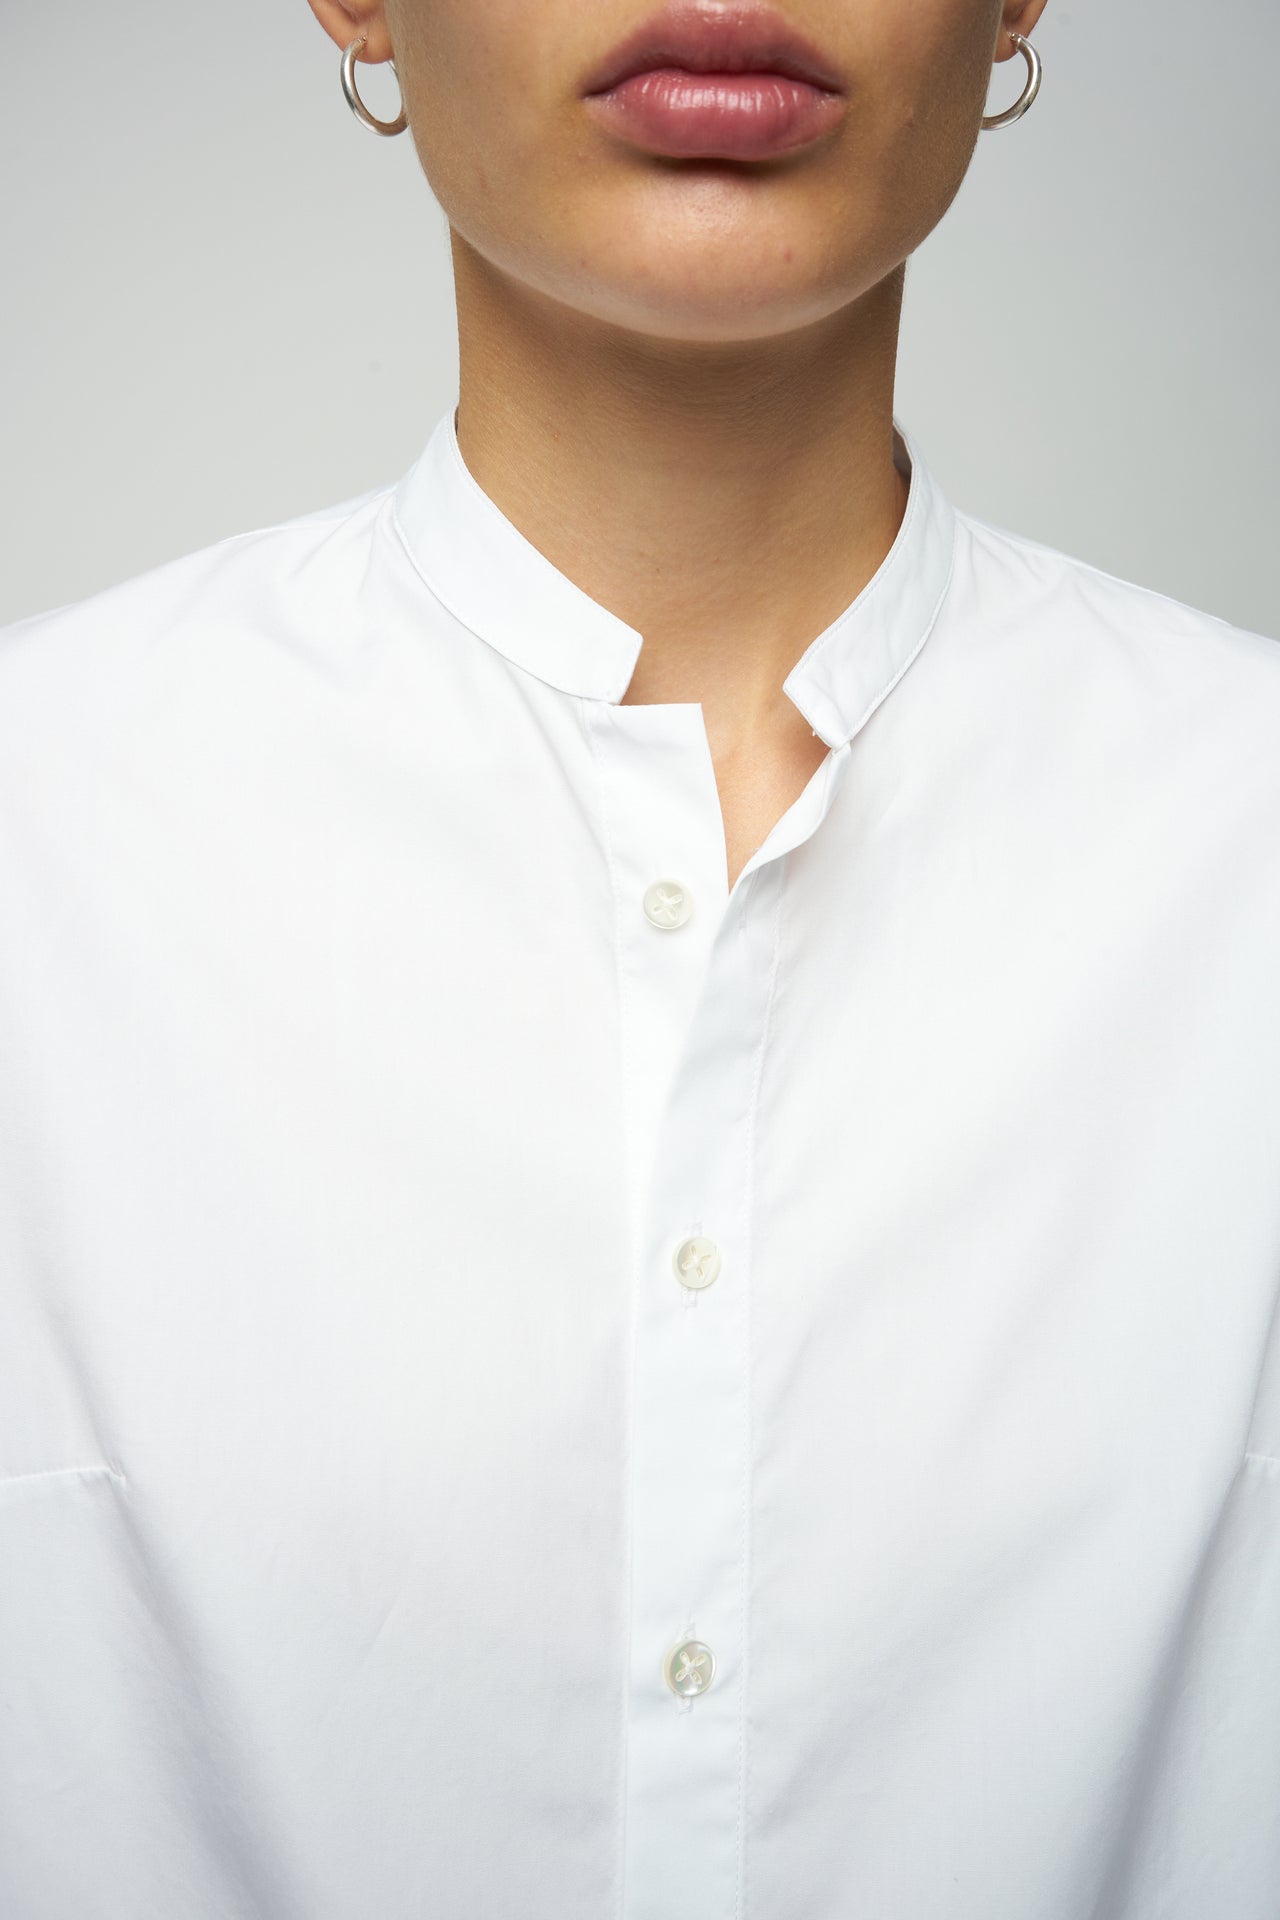 Relaxed Bulky Sleeves Shirt in a White Portuguese Organic Cotton Poplin